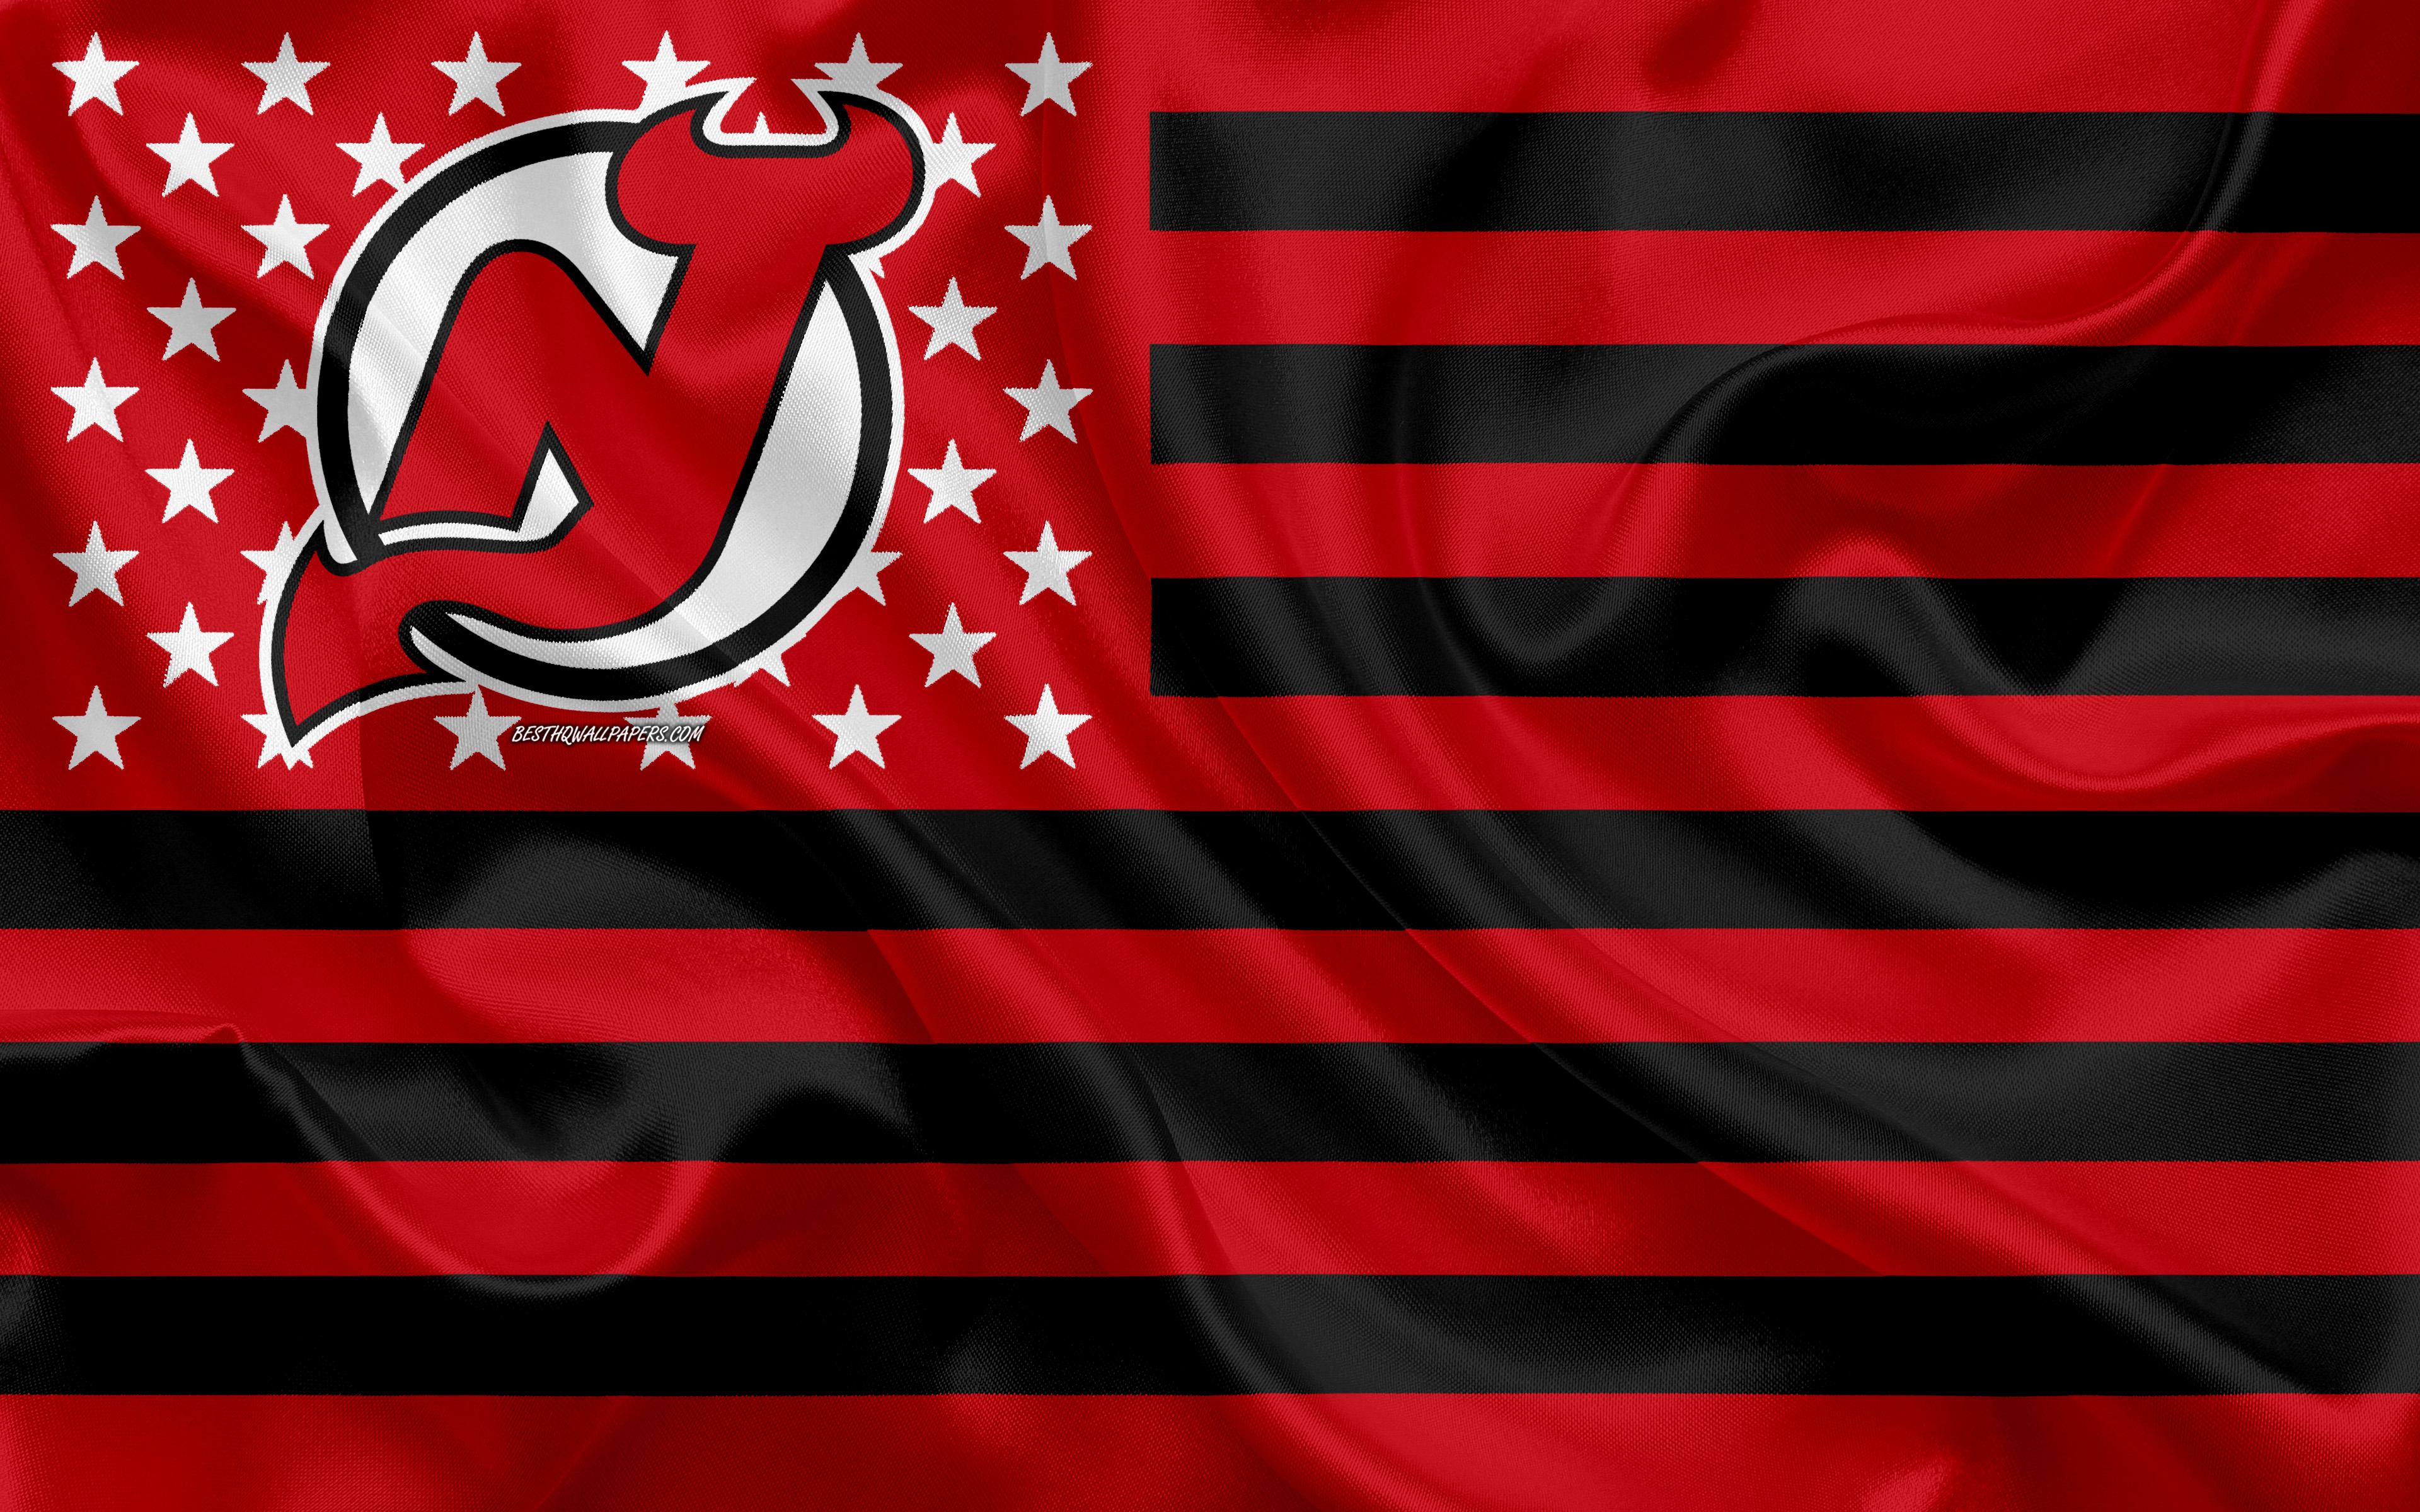 Download wallpapers New Jersey Devils, fire logo, NHL, red and